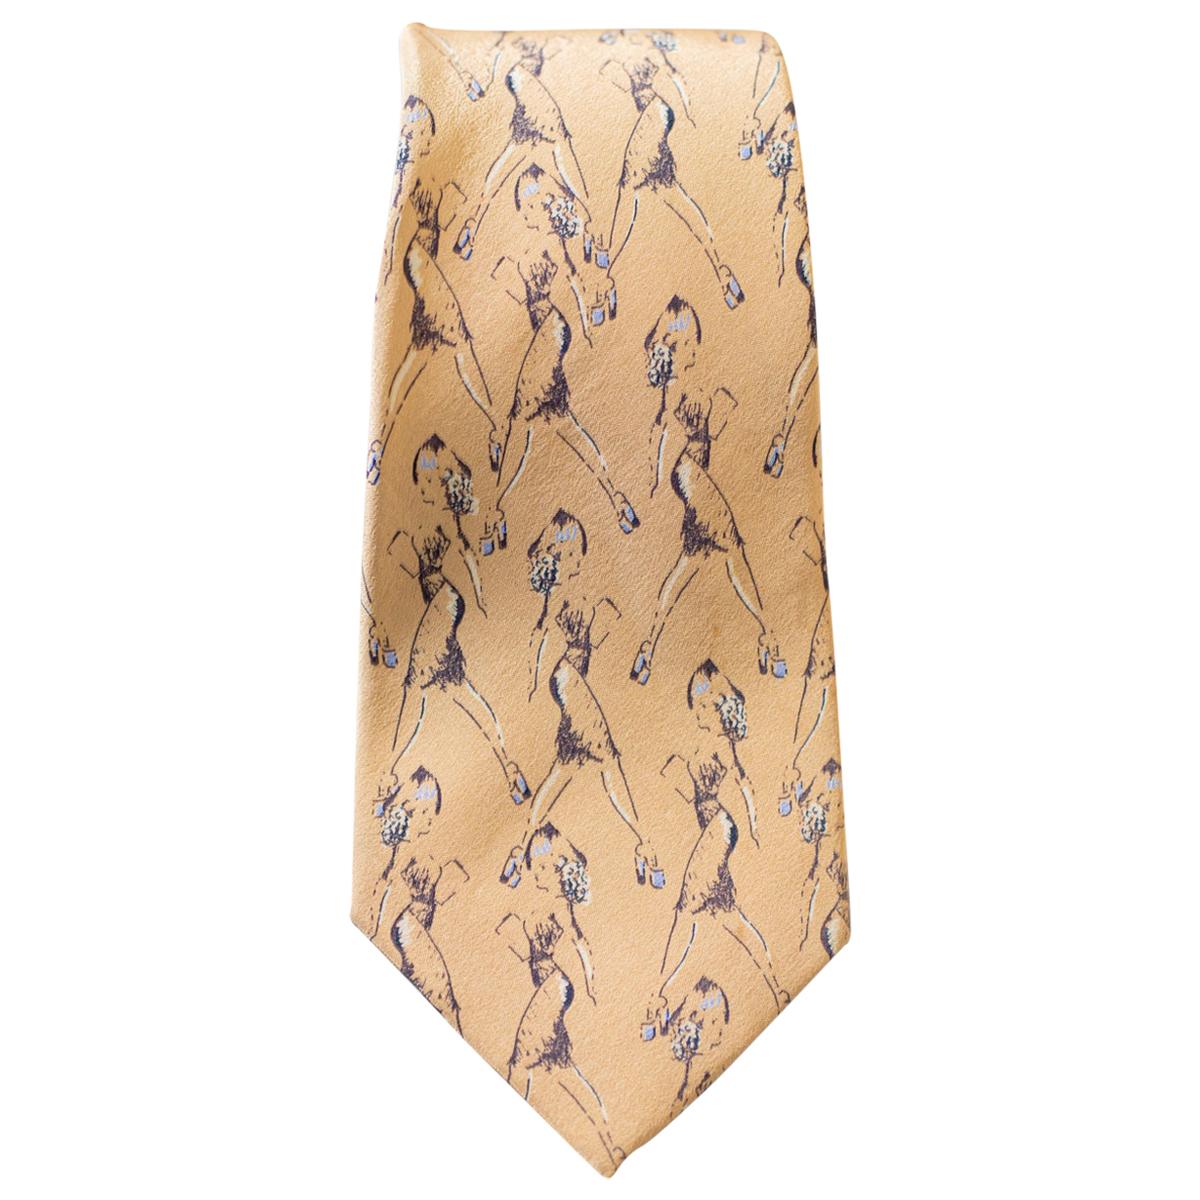 Vintage Borsalino 100% silk tie with drawings of a woman For Sale